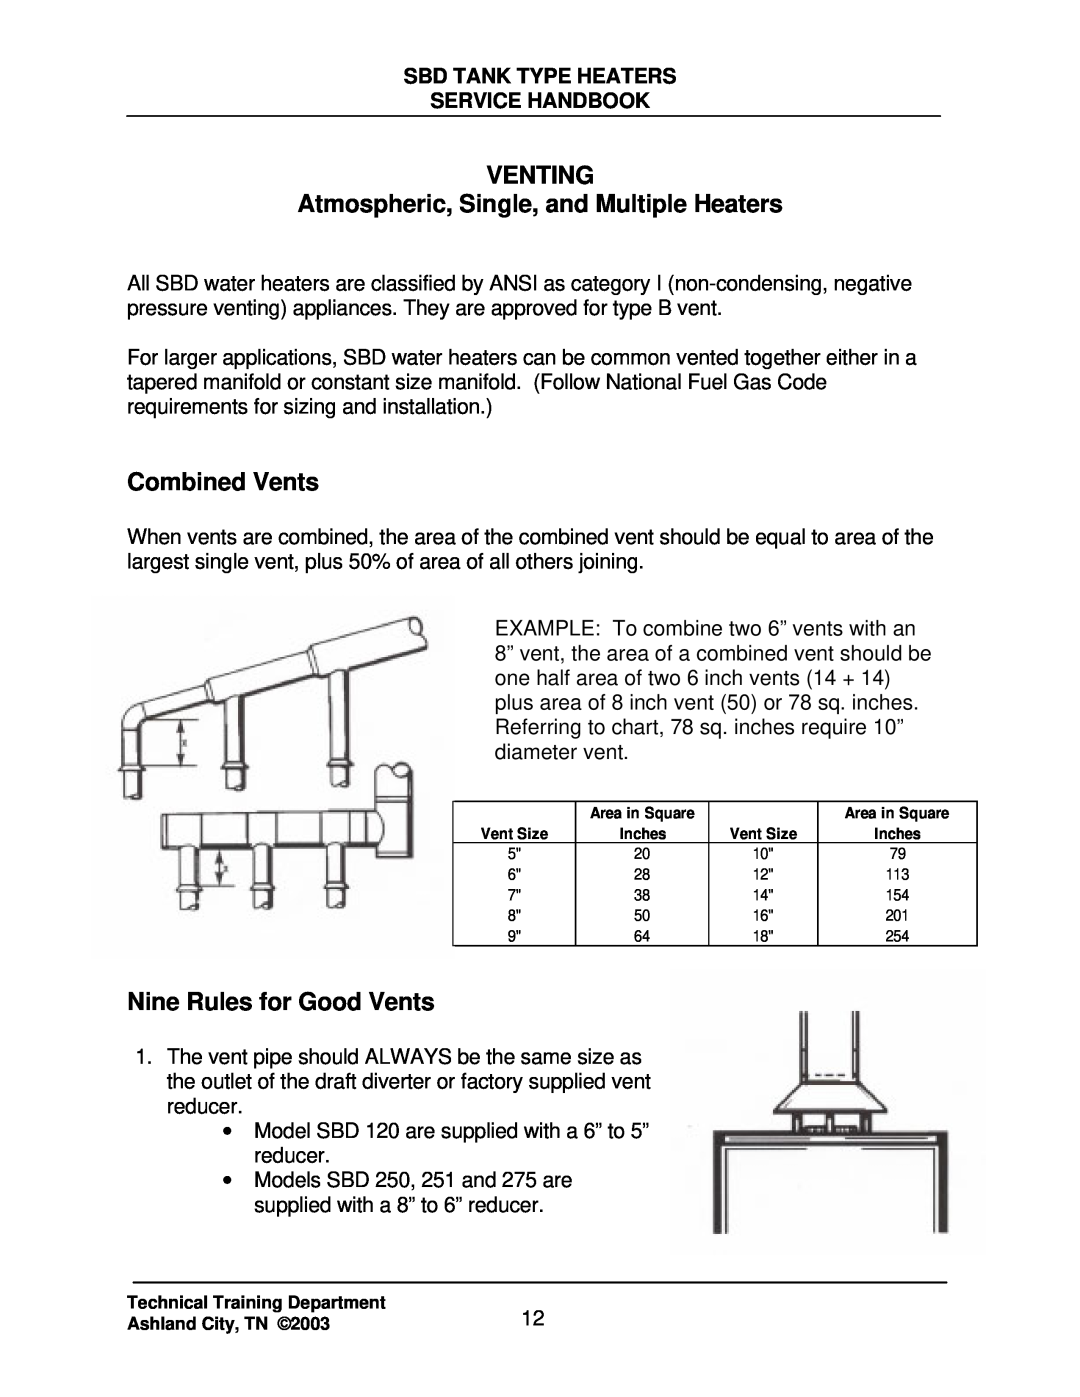 State Industries SBD71 120 VENTING Atmospheric, Single, and Multiple Heaters, Combined Vents, Nine Rules for Good Vents 